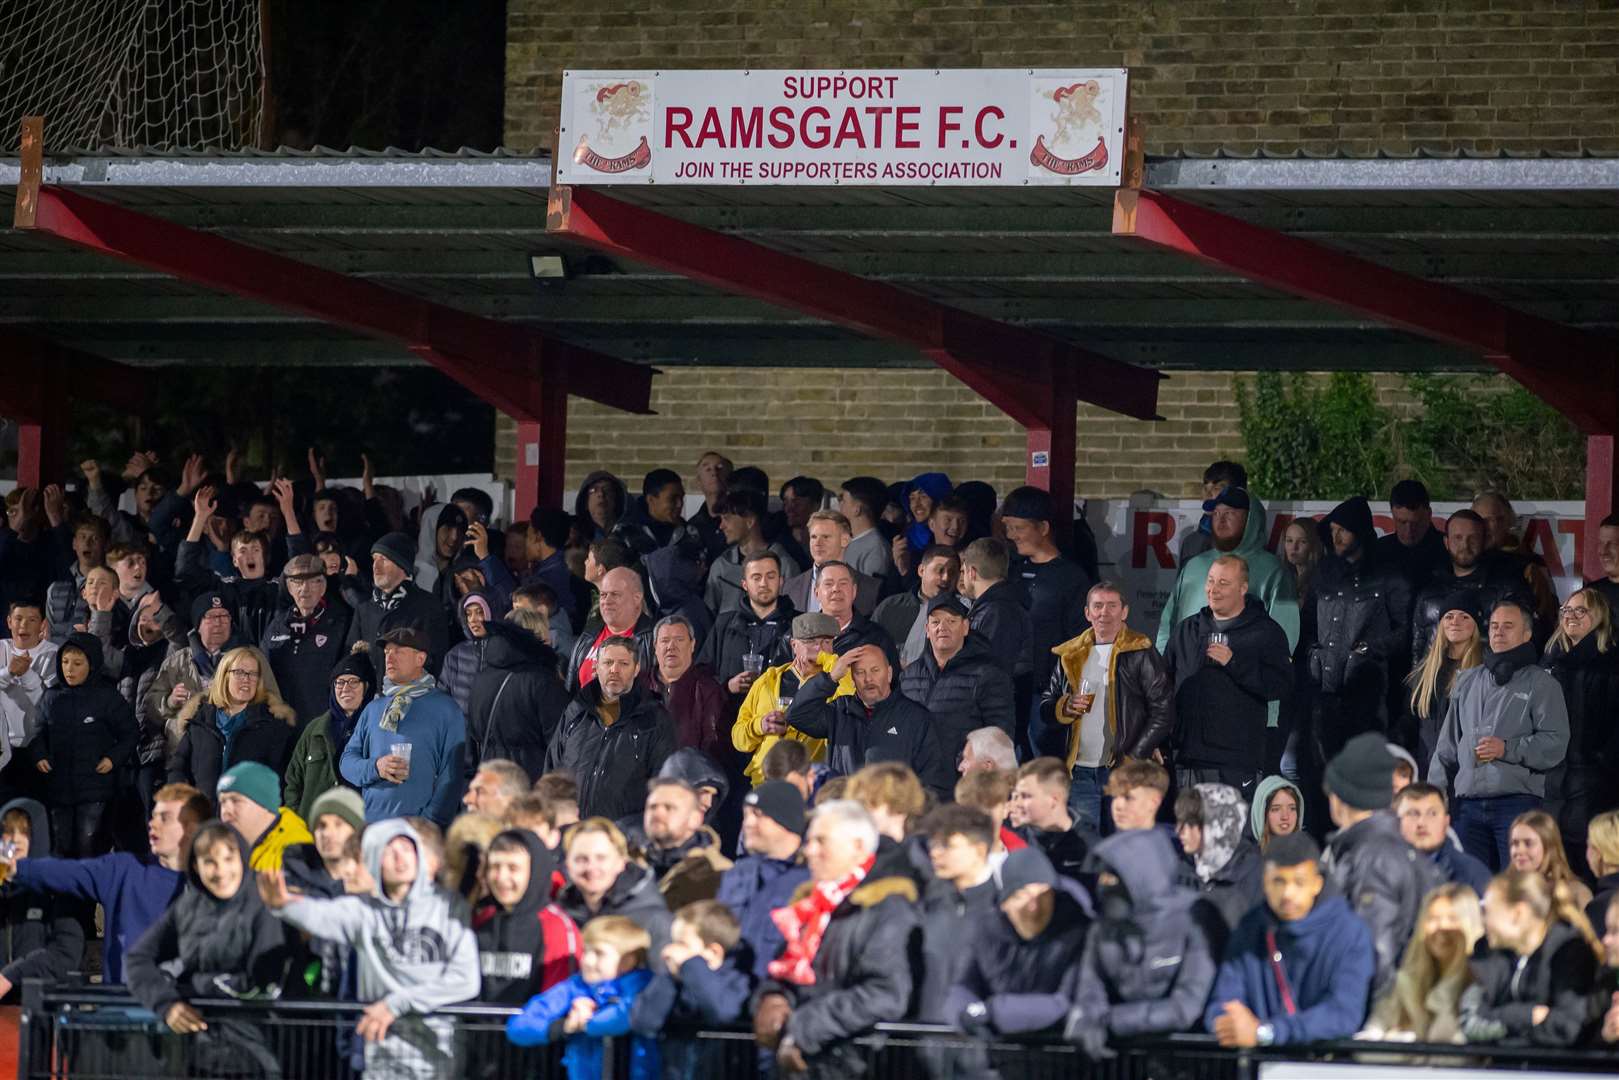 Ramsgate fans get behind their team at Southwood. Picture: Ian Scammell